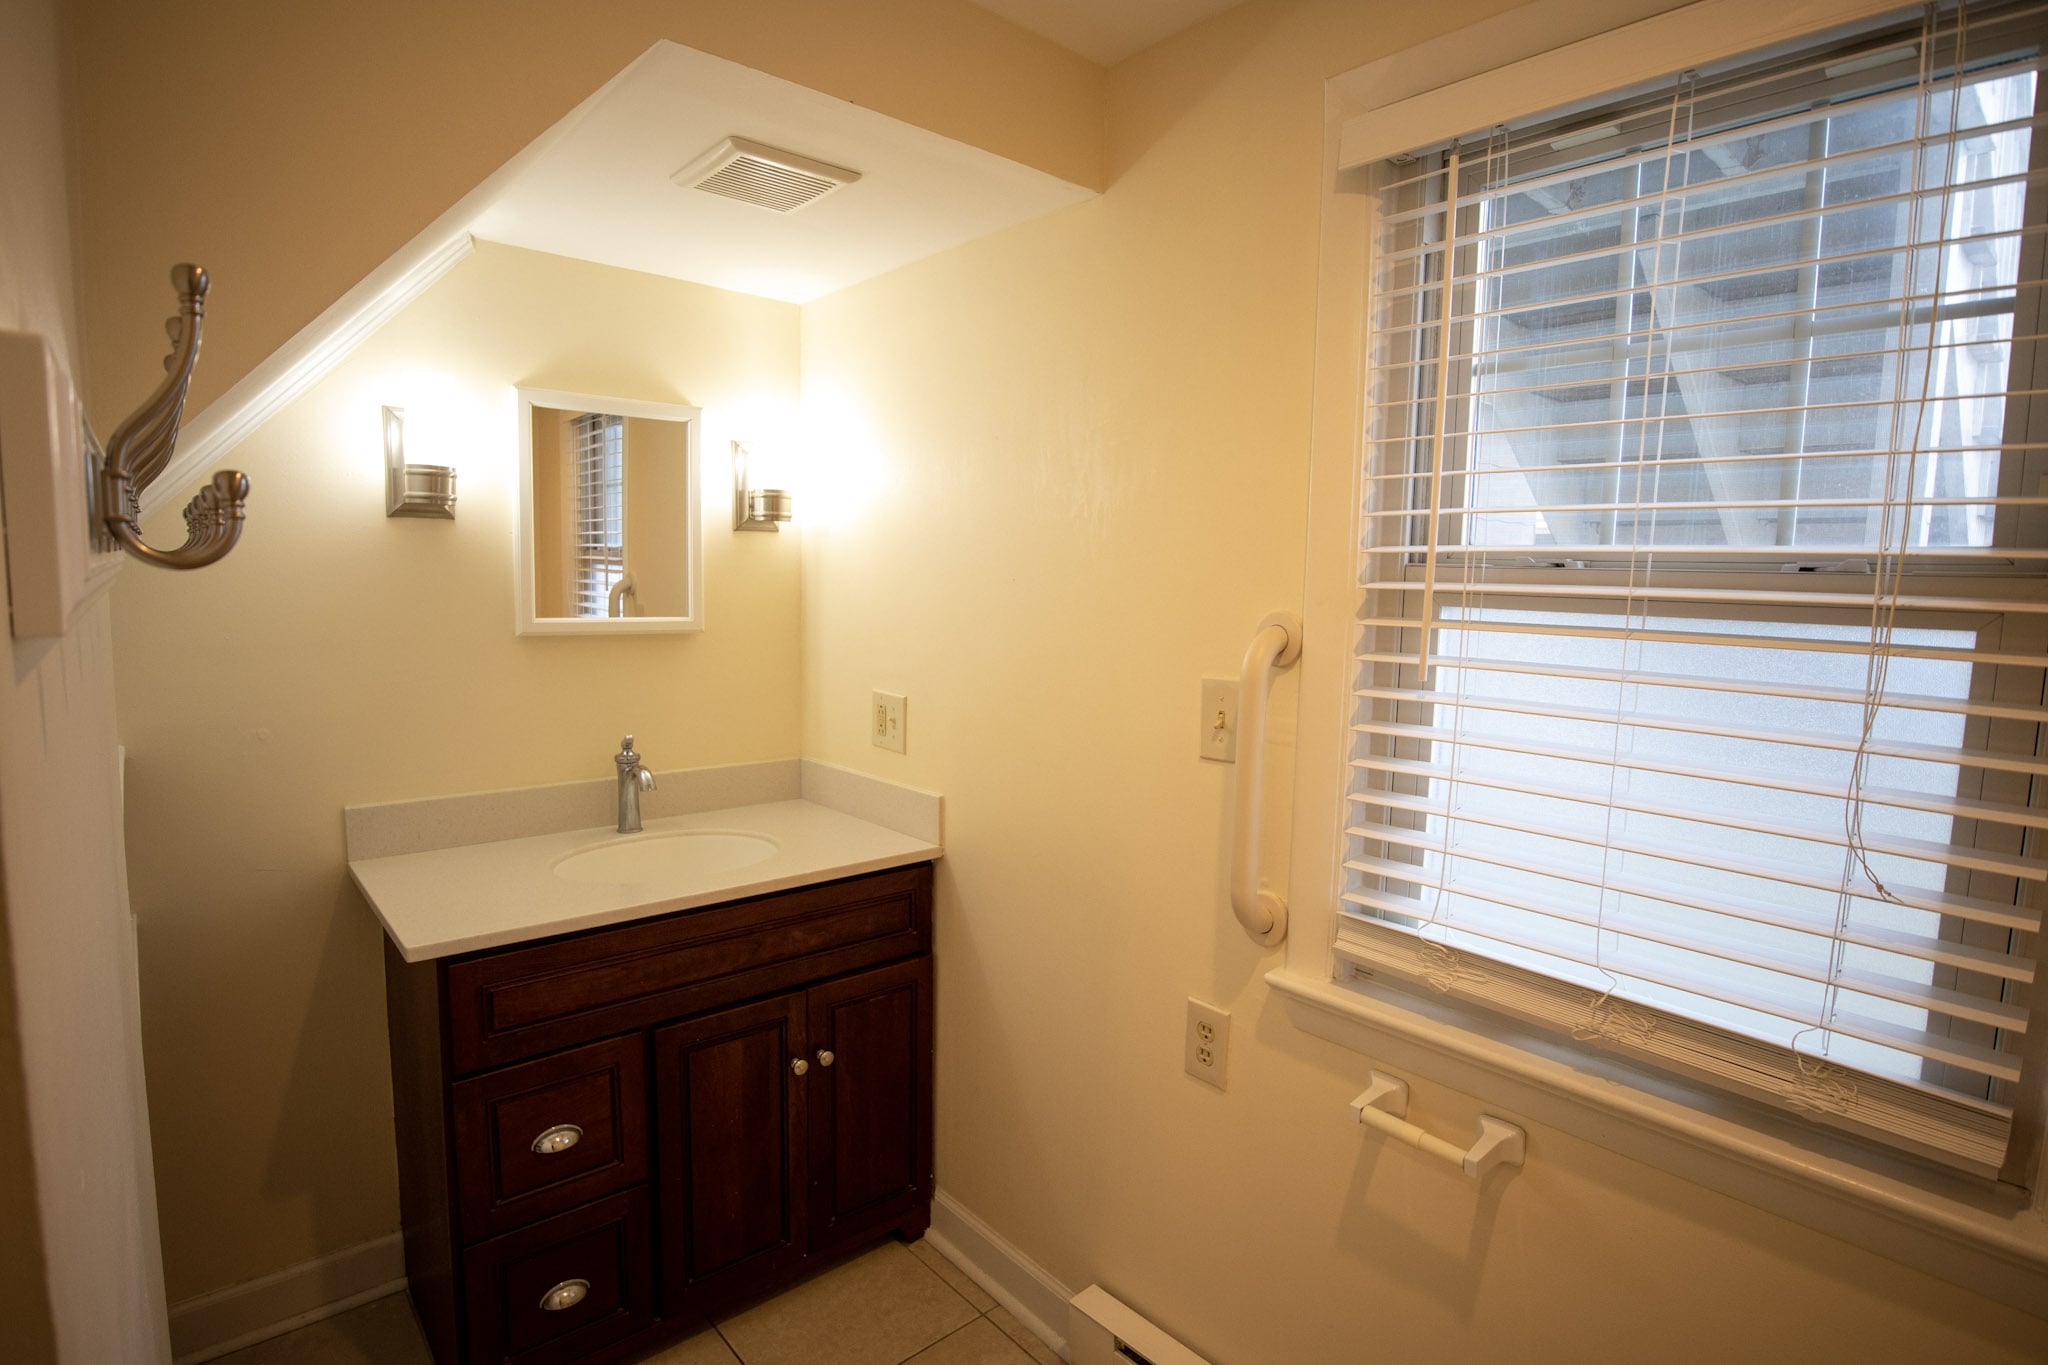 Bathroom vanity in the three bedroom apartment at the Majestic Hotel in Ocean City, Maryland